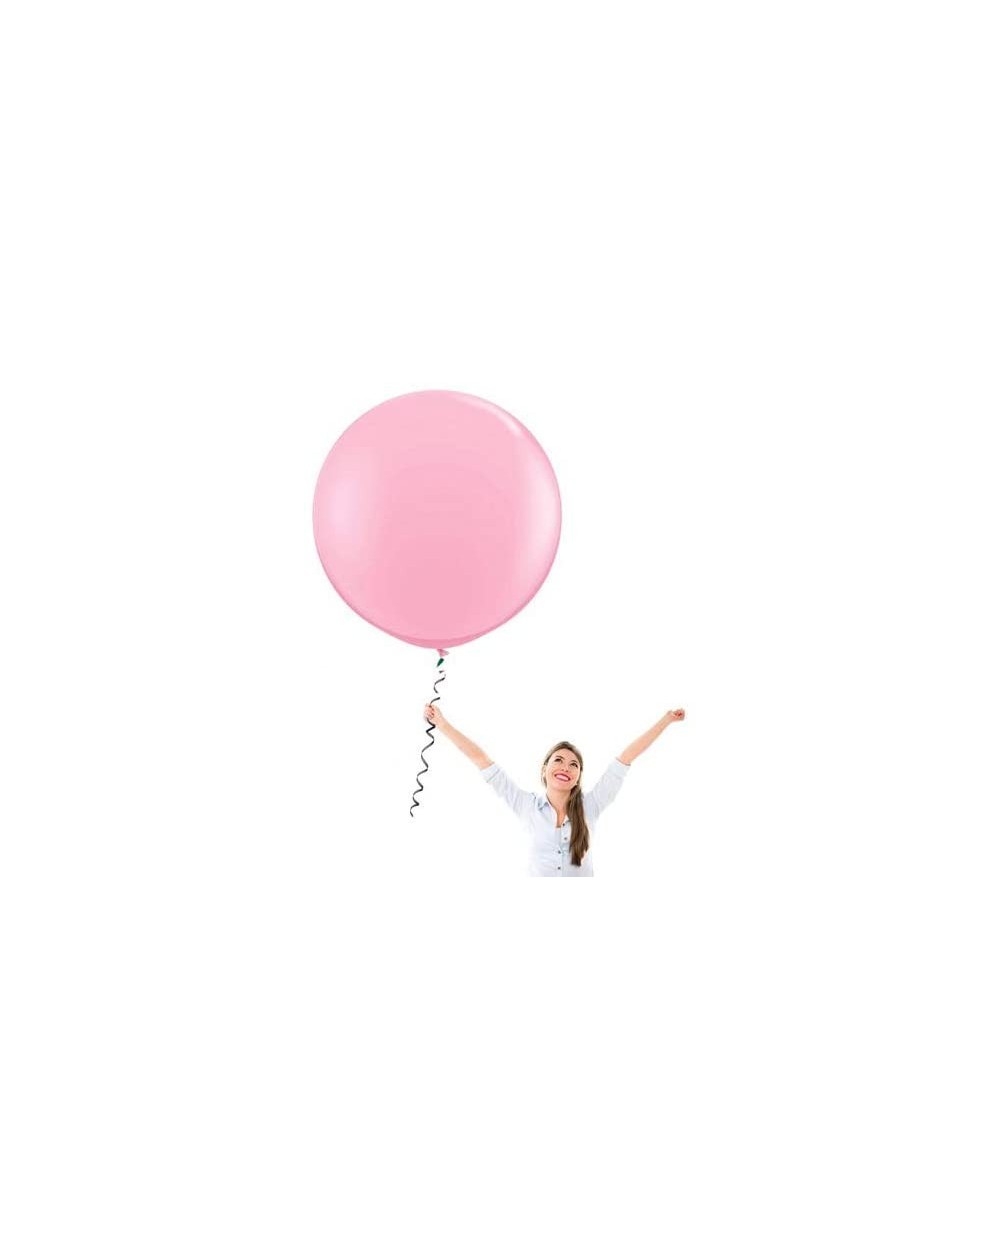 Balloons Celebrity 24DHP 24" Latex Balloons- Pink (Pack of 10) - CR18GZTY9YK $21.03